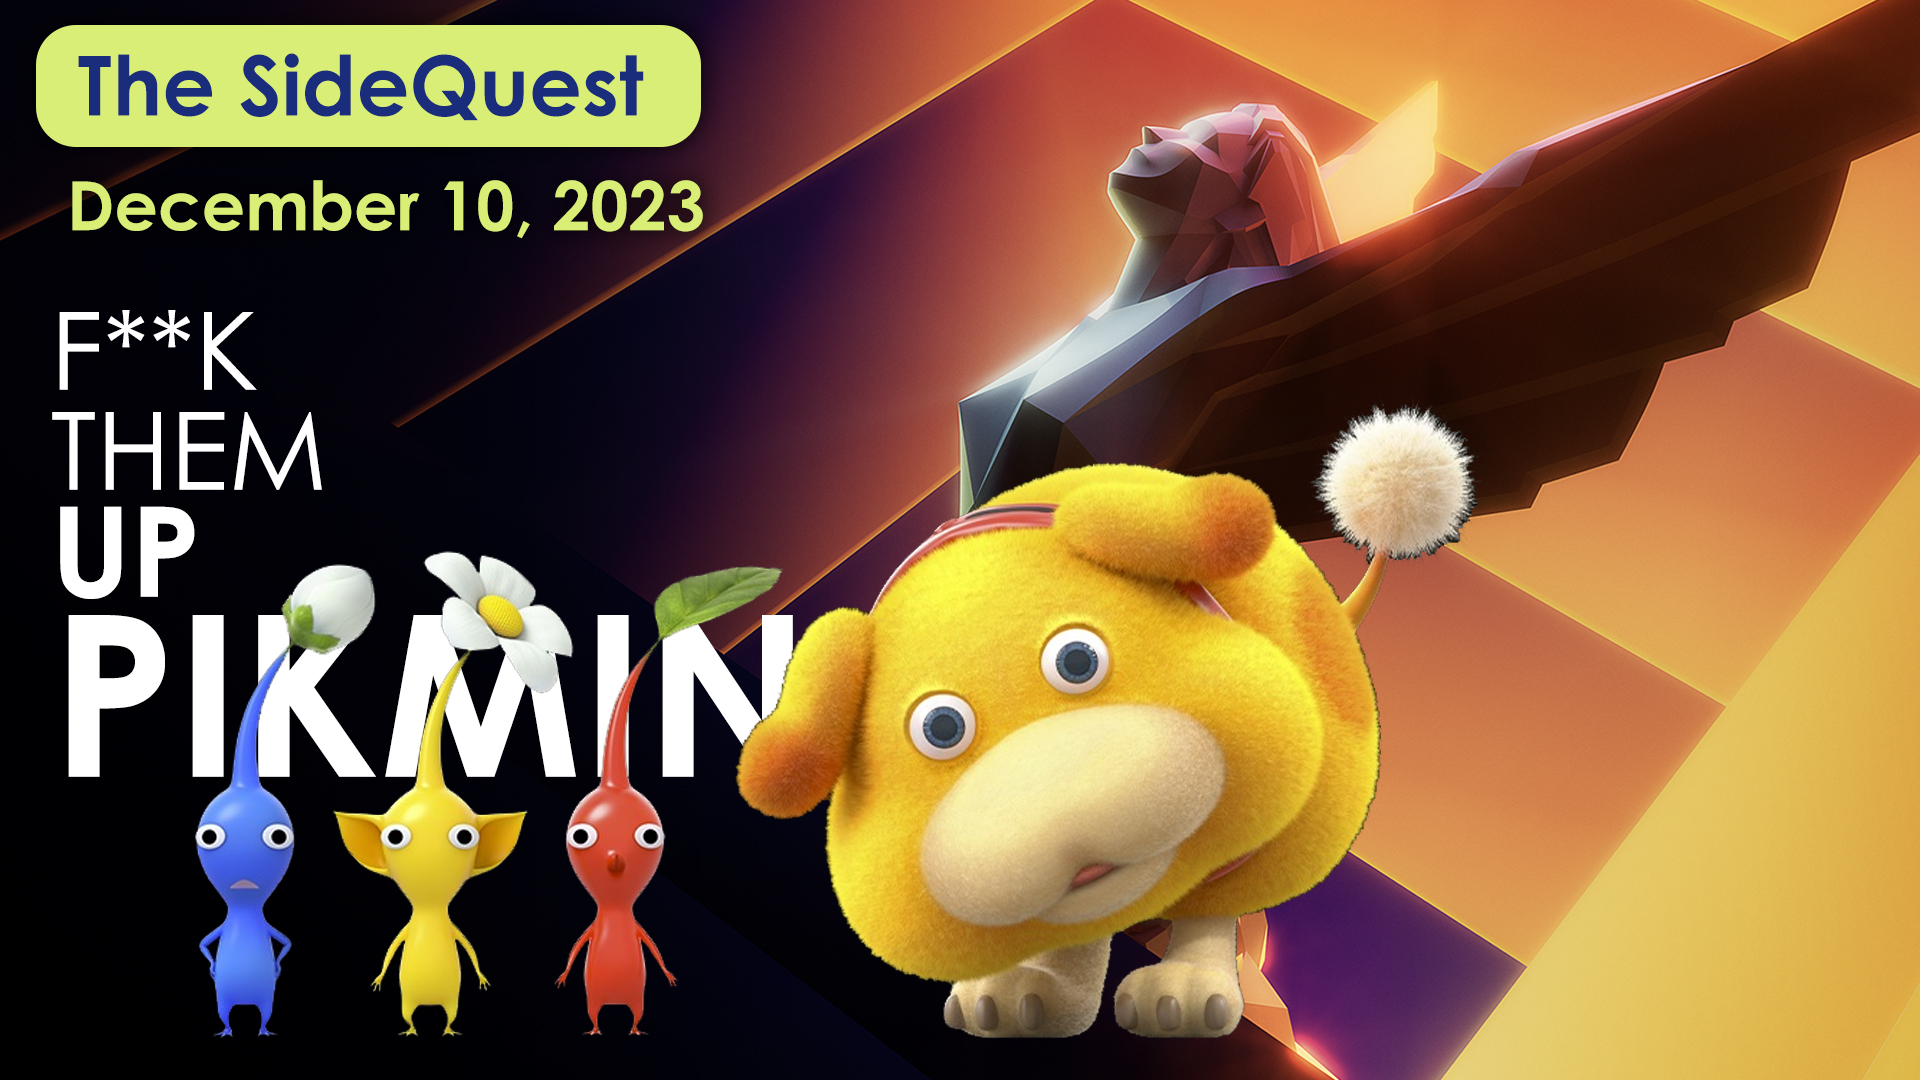 The SideQuest LIVE! December 10, 2023: F**K them up, Pikmin!